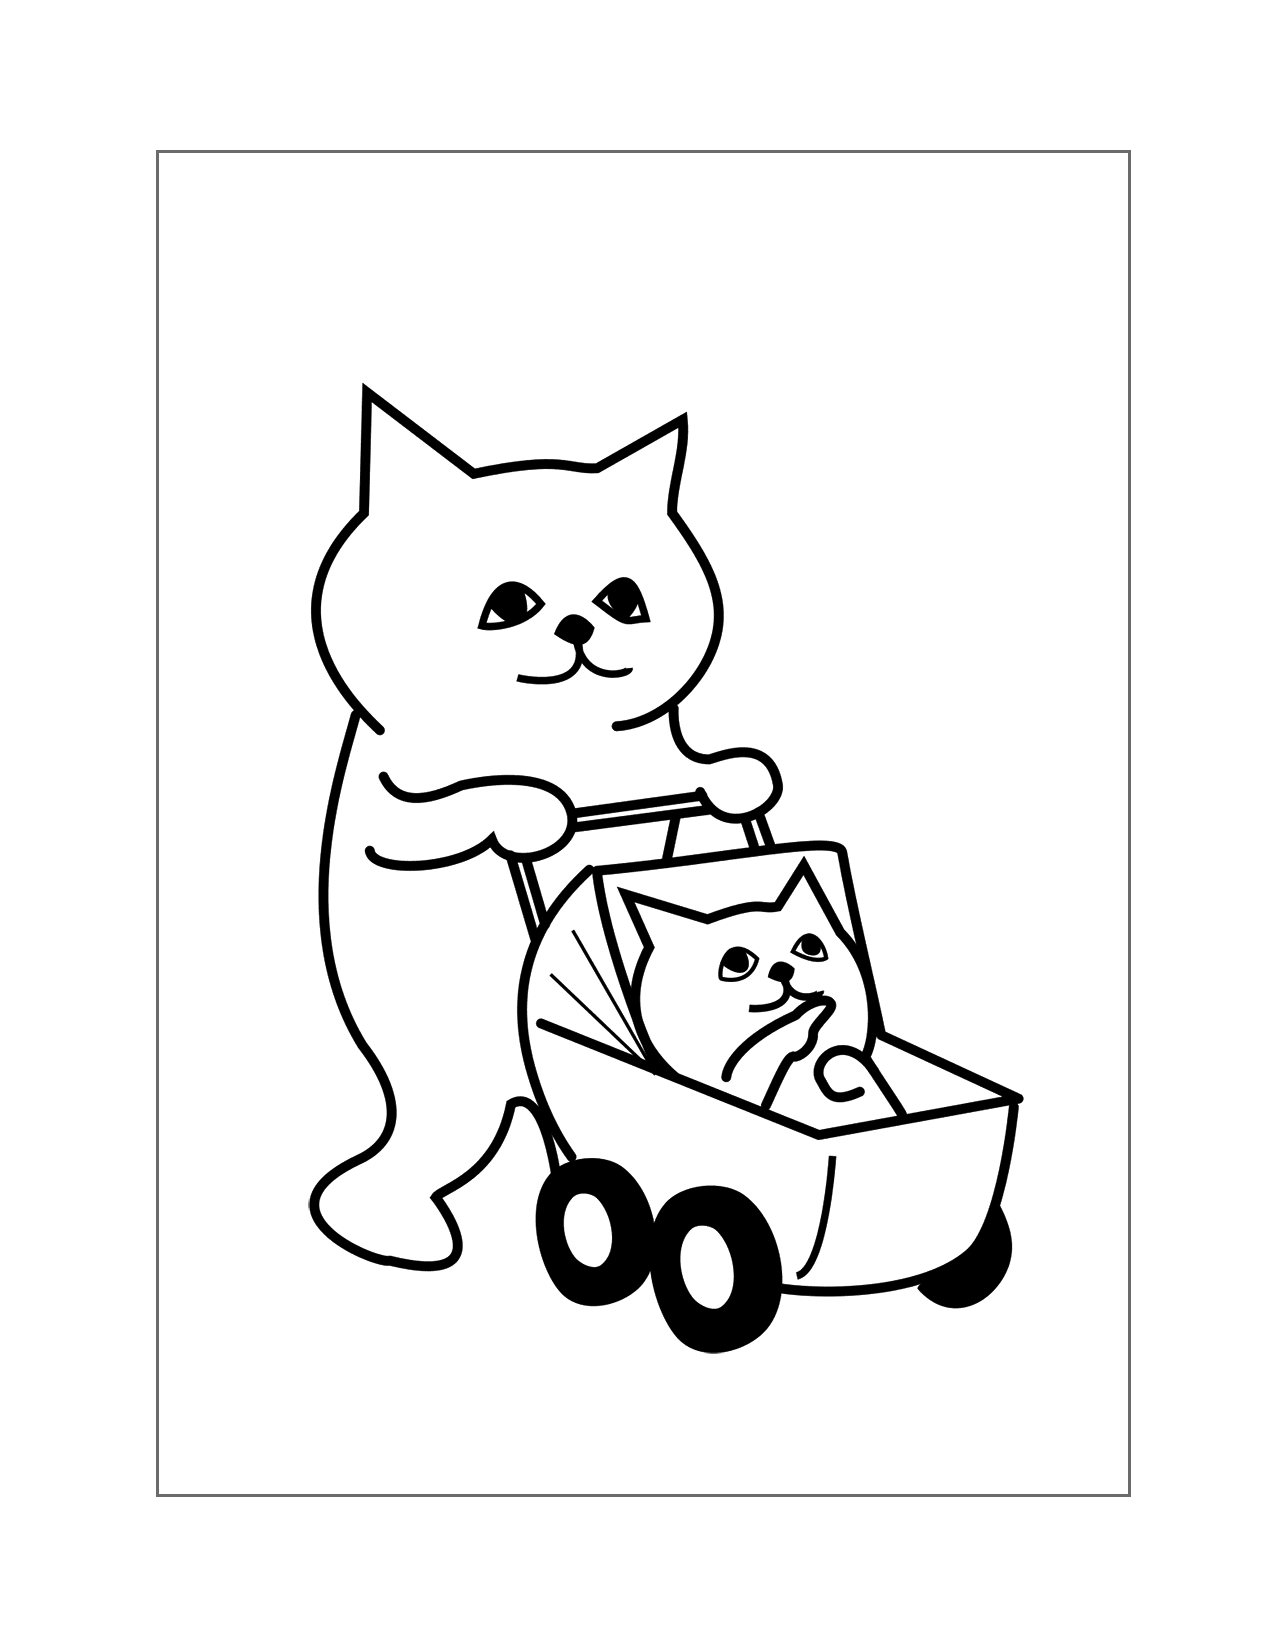 Mom And Kitten Coloring Page